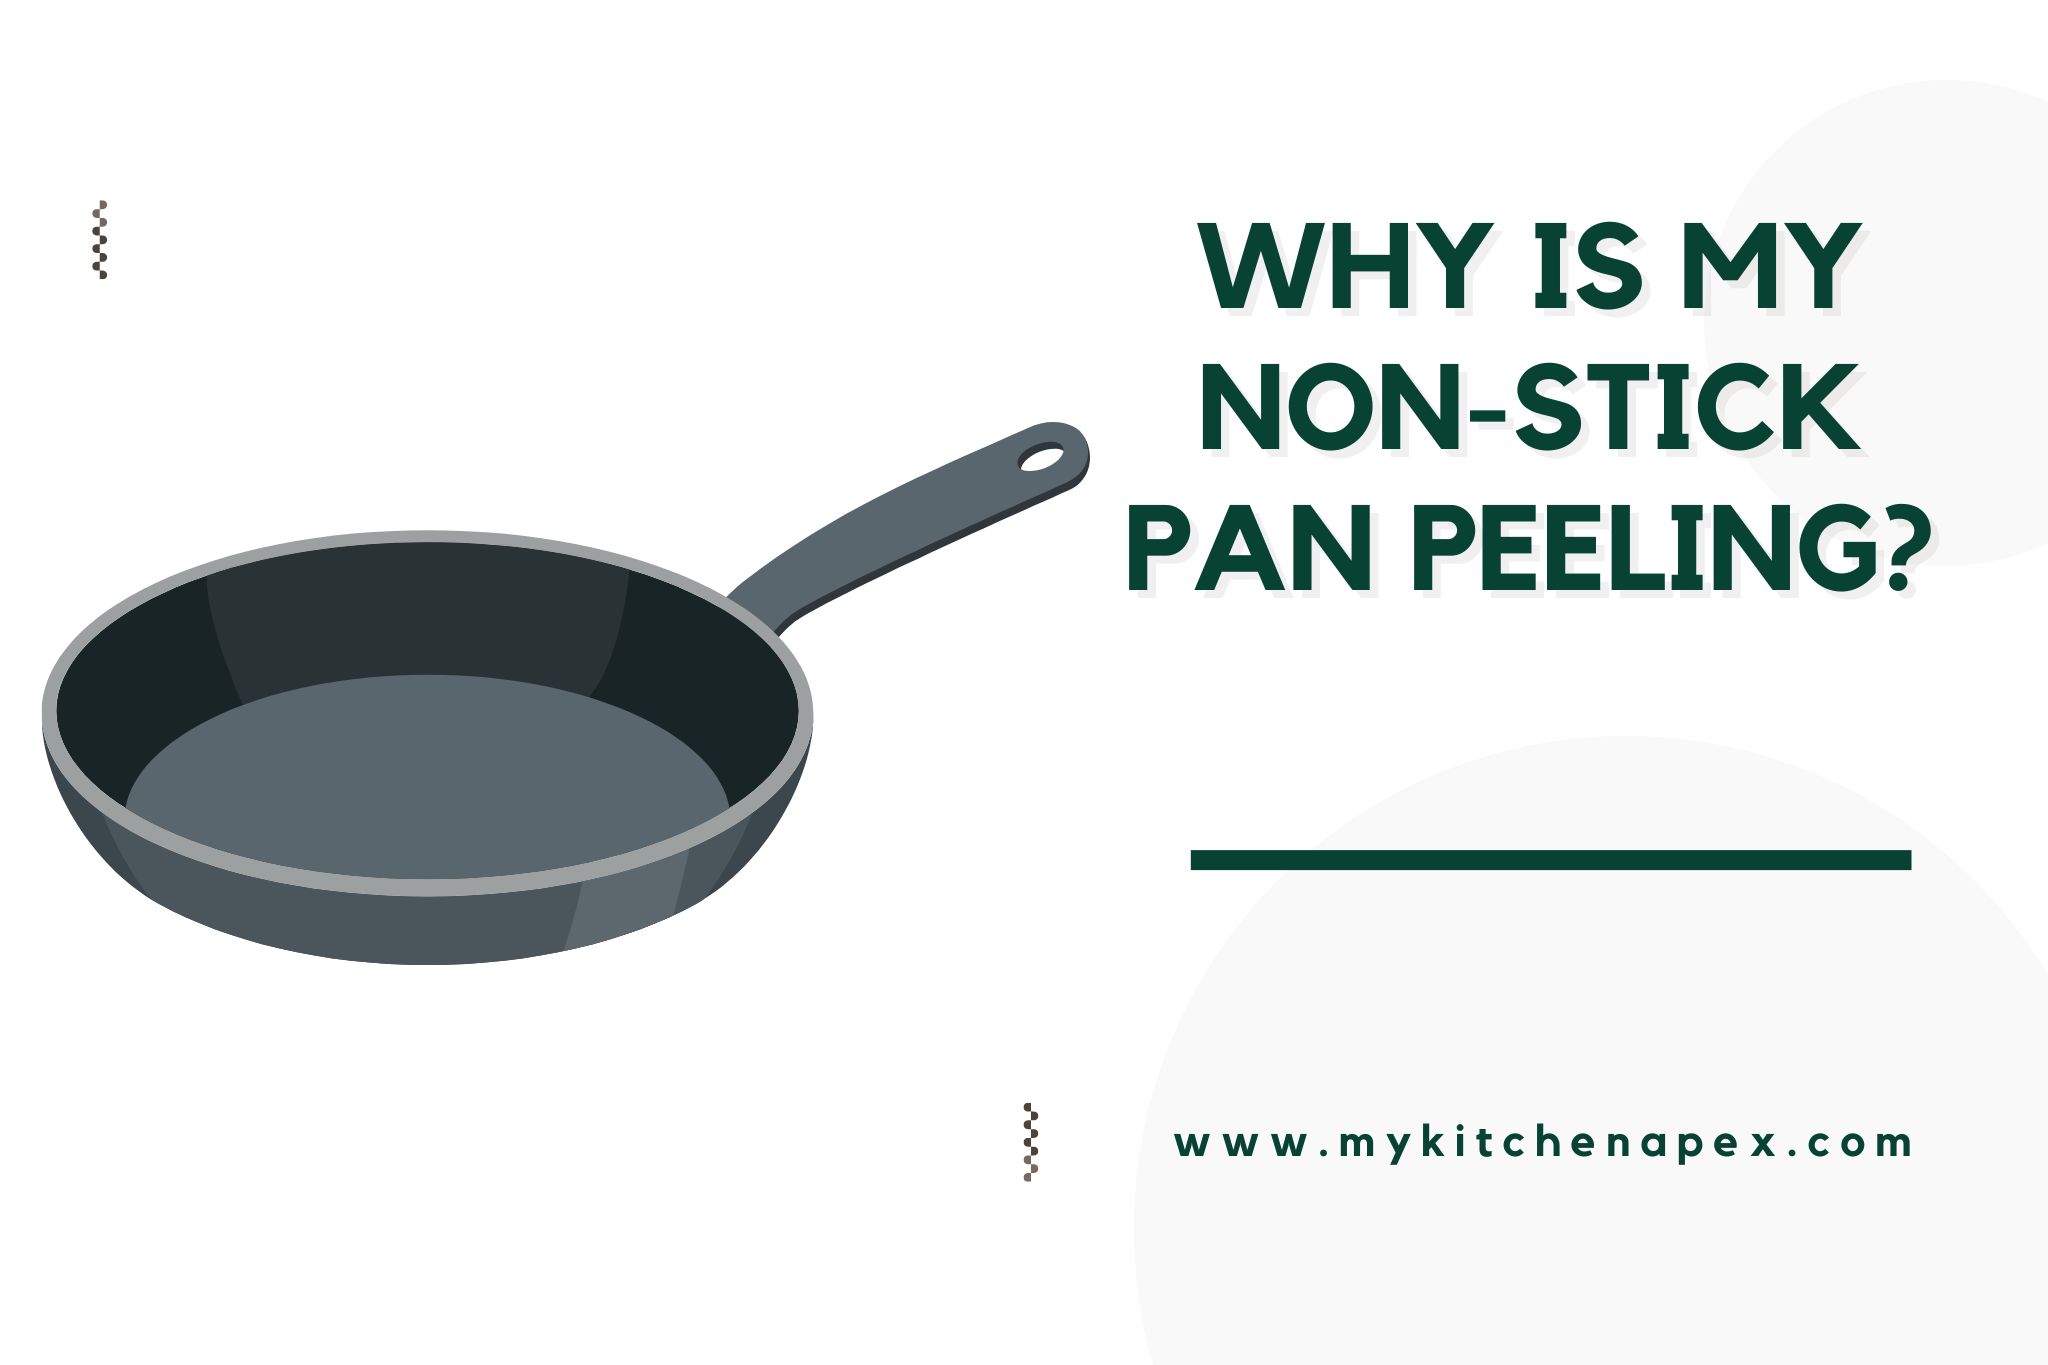 Why is my non-stick pan peeling?